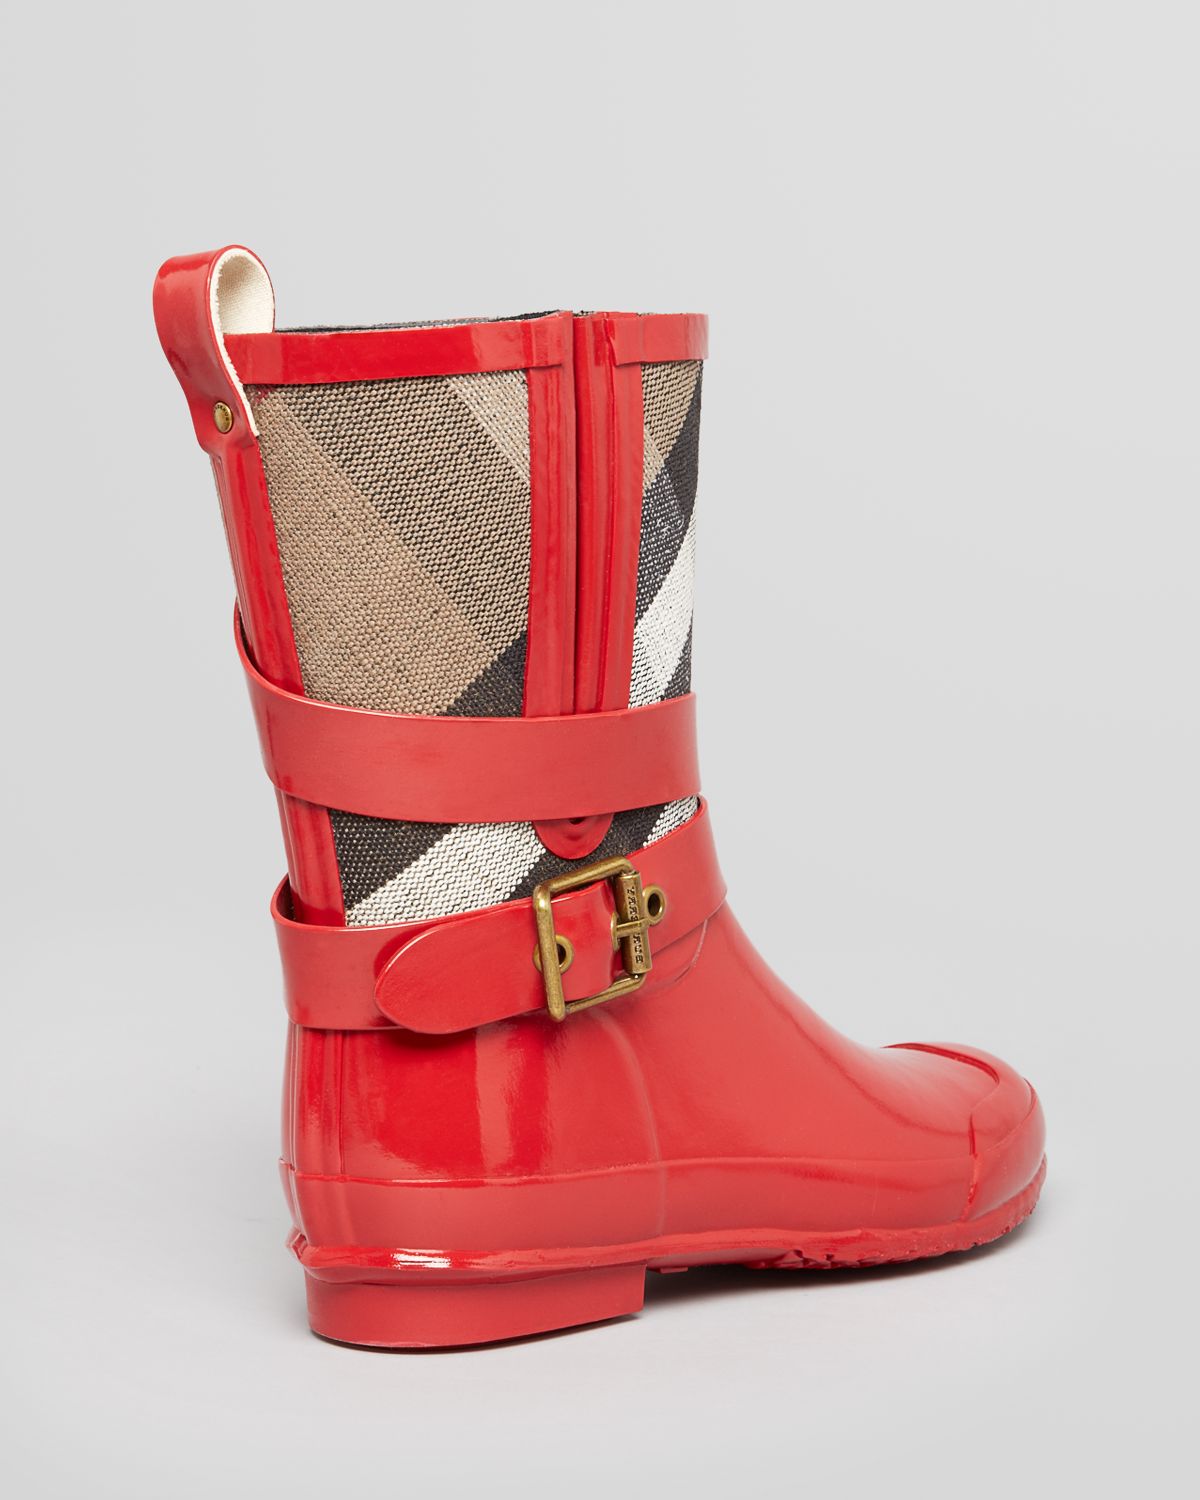 burberry rain boots red